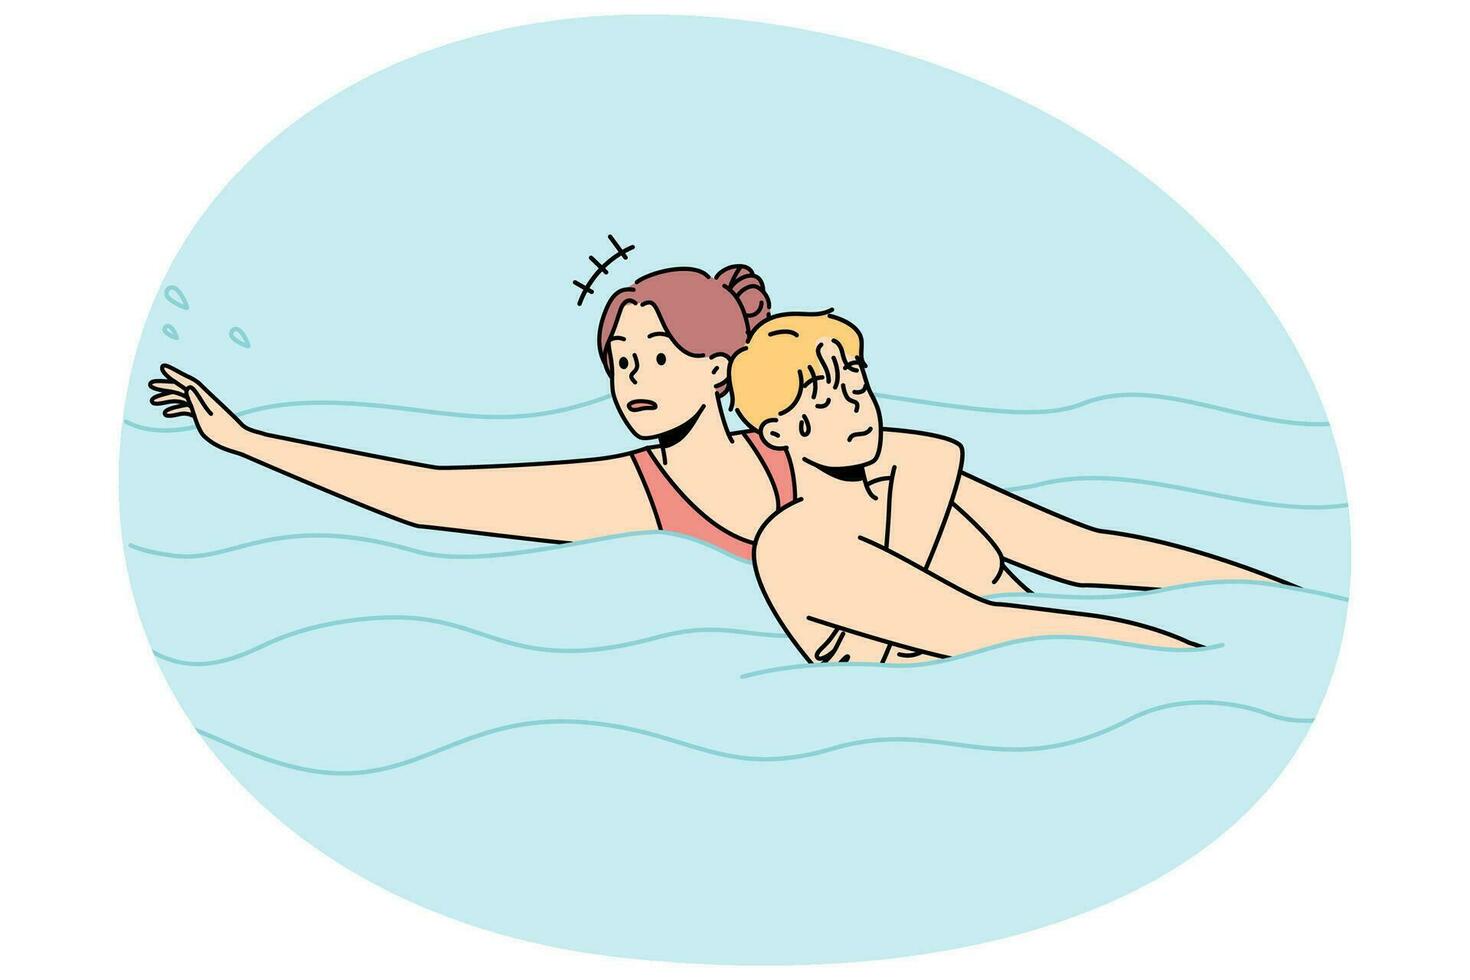 Woman saving man drowning in water. Lifeguard help guy going under in swimming pool. Emergency and rescue. Vector illustration.